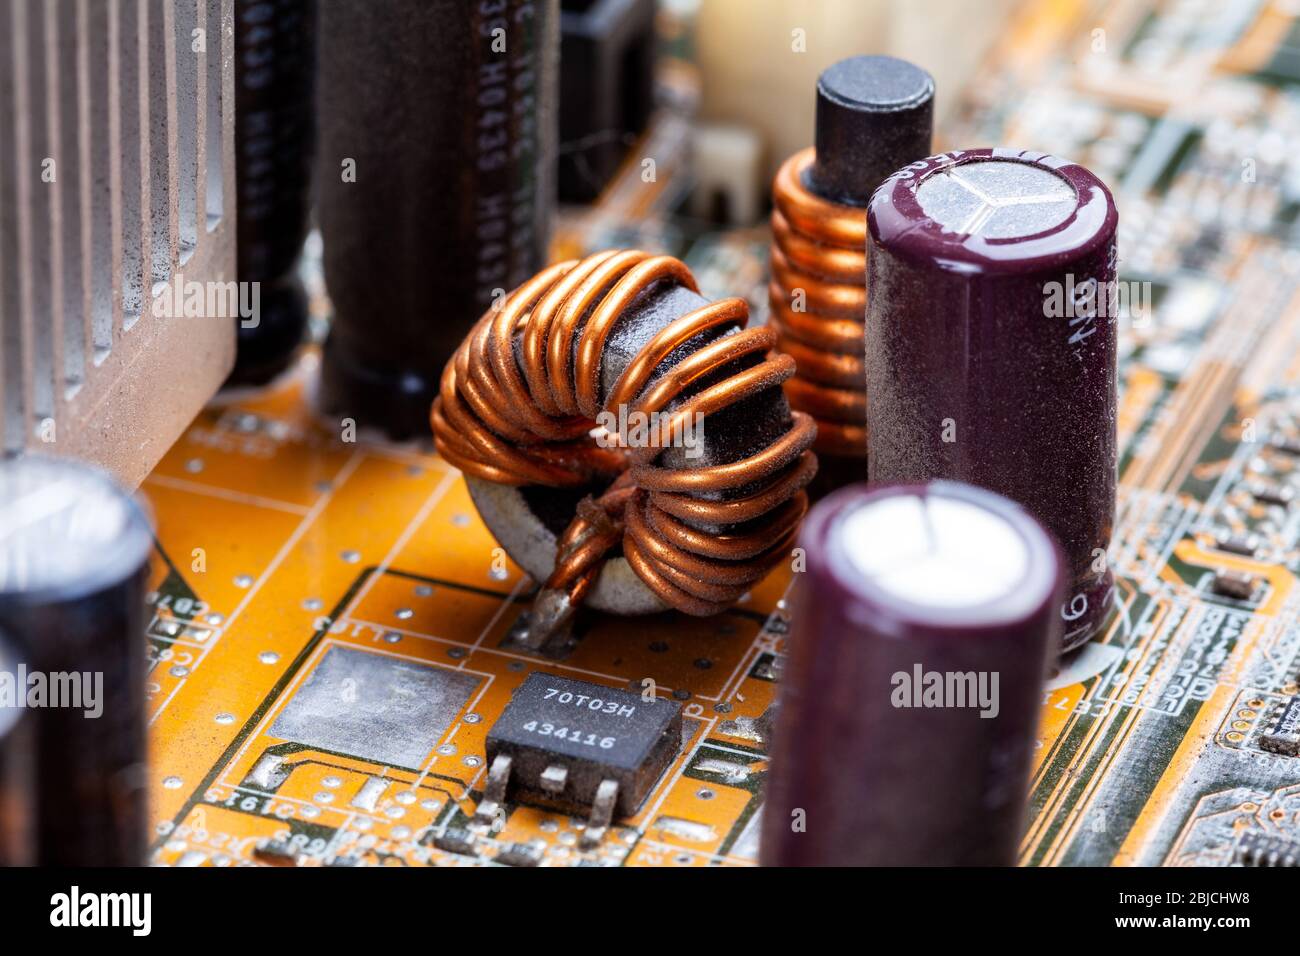 Copper coil, inductor winding part on a pc motherboard, circuit board macro, closeup. Coil whine noise issue abstract concept, electronic elements Stock Photo